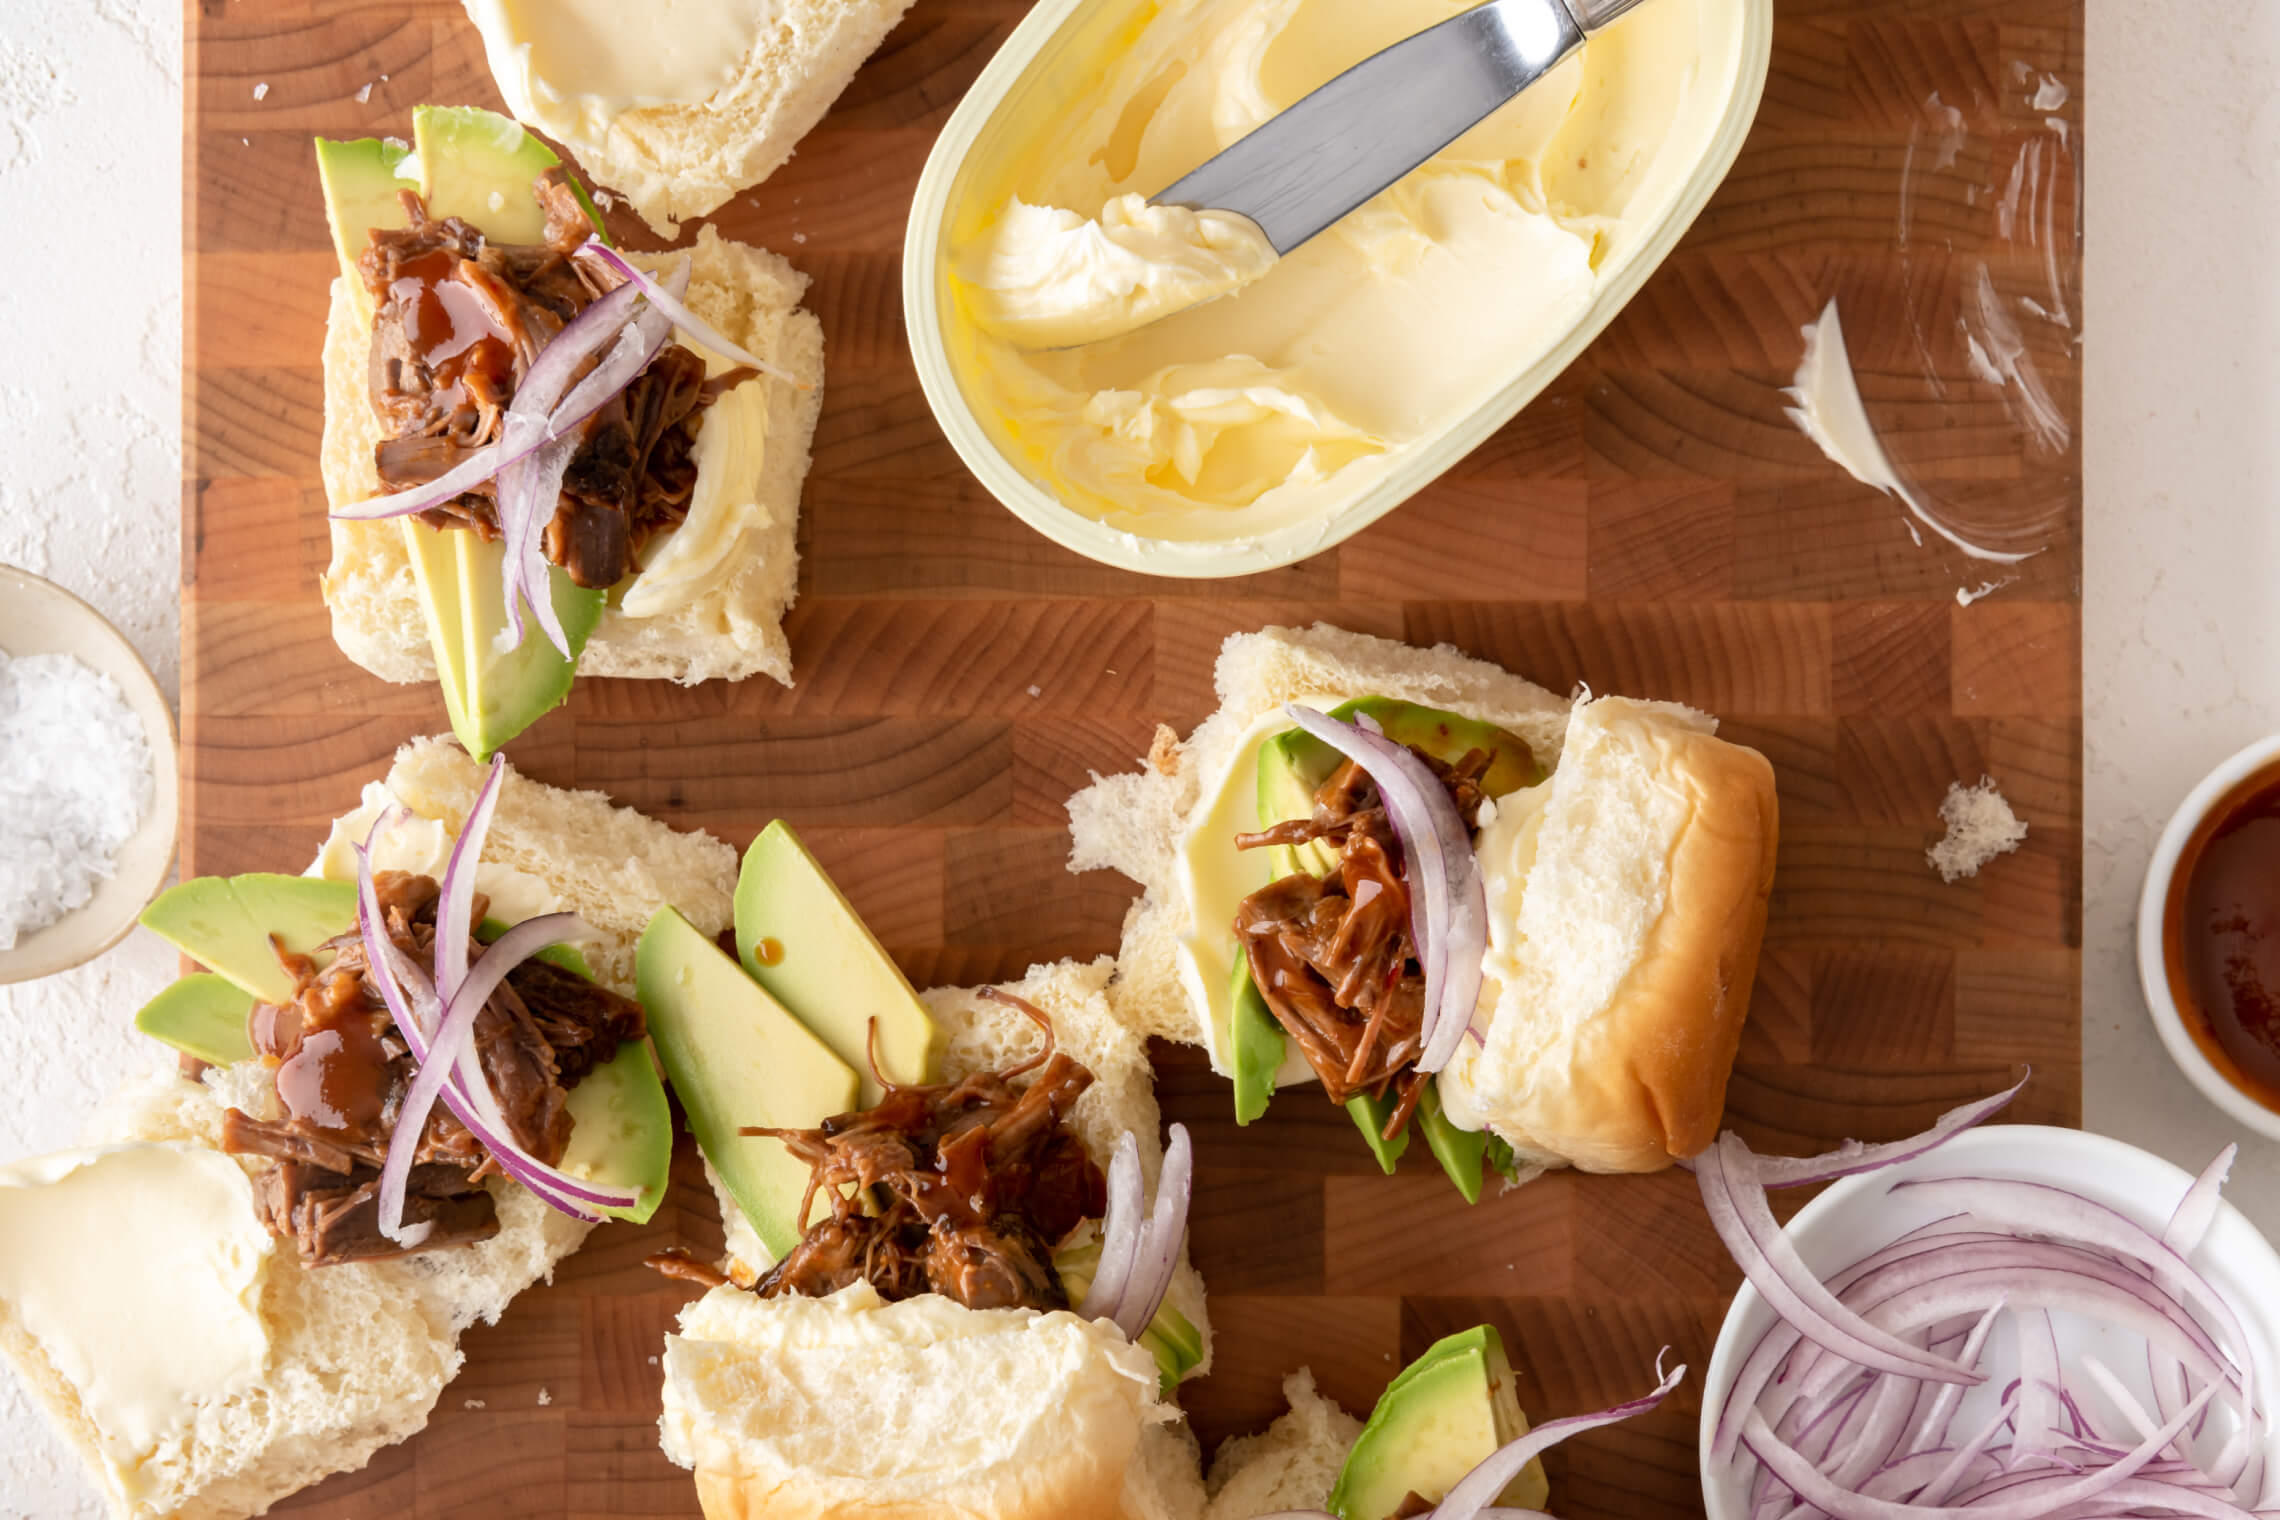 BBQ Brisket Sliders with Avocado and Red Onion